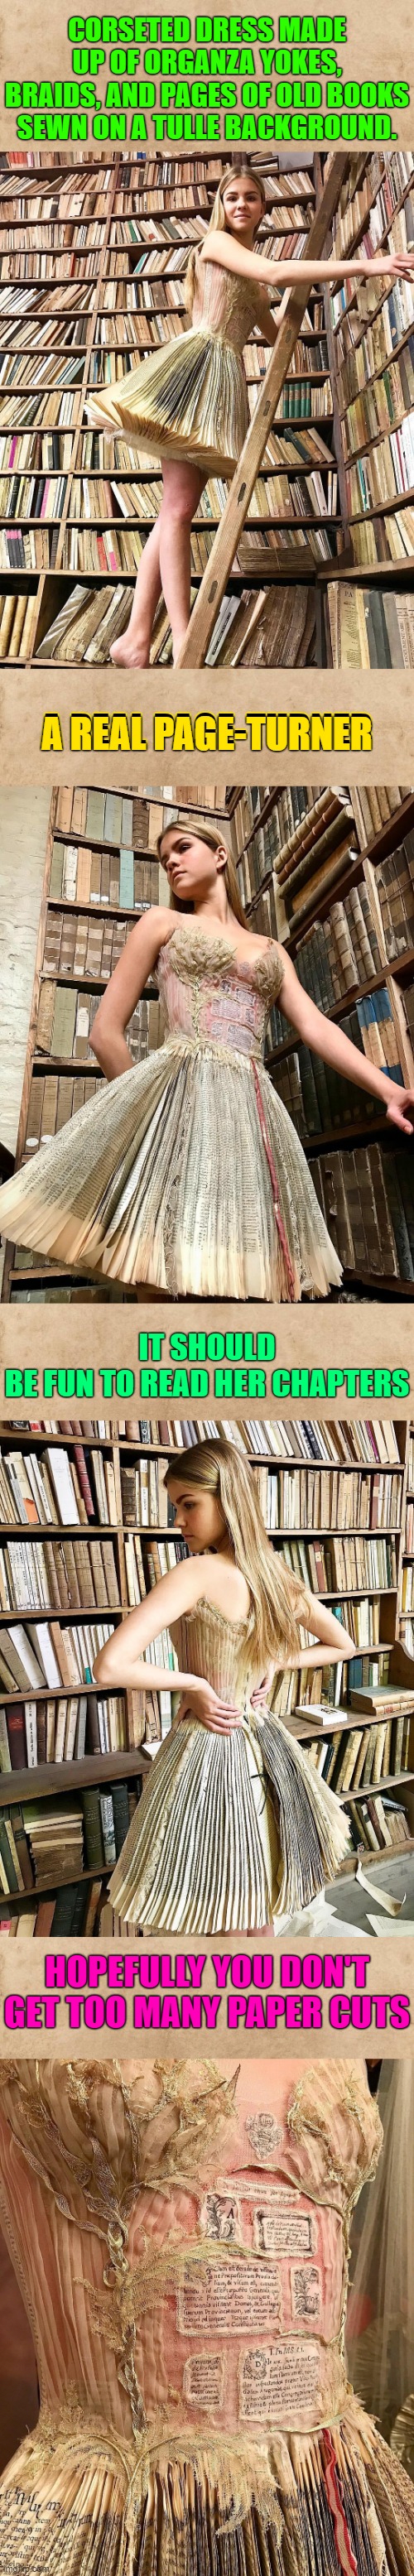 A dress made from books. That's certainly a novel idea.. | CORSETED DRESS MADE UP OF ORGANZA YOKES, BRAIDS, AND PAGES OF OLD BOOKS SEWN ON A TULLE BACKGROUND. A REAL PAGE-TURNER; A REAL PAGE-TURNER; IT SHOULD BE FUN TO READ HER CHAPTERS; HOPEFULLY YOU DON'T GET TOO MANY PAPER CUTS | image tagged in memes,robe livre,sylvie facon,france,salome bellet,art | made w/ Imgflip meme maker